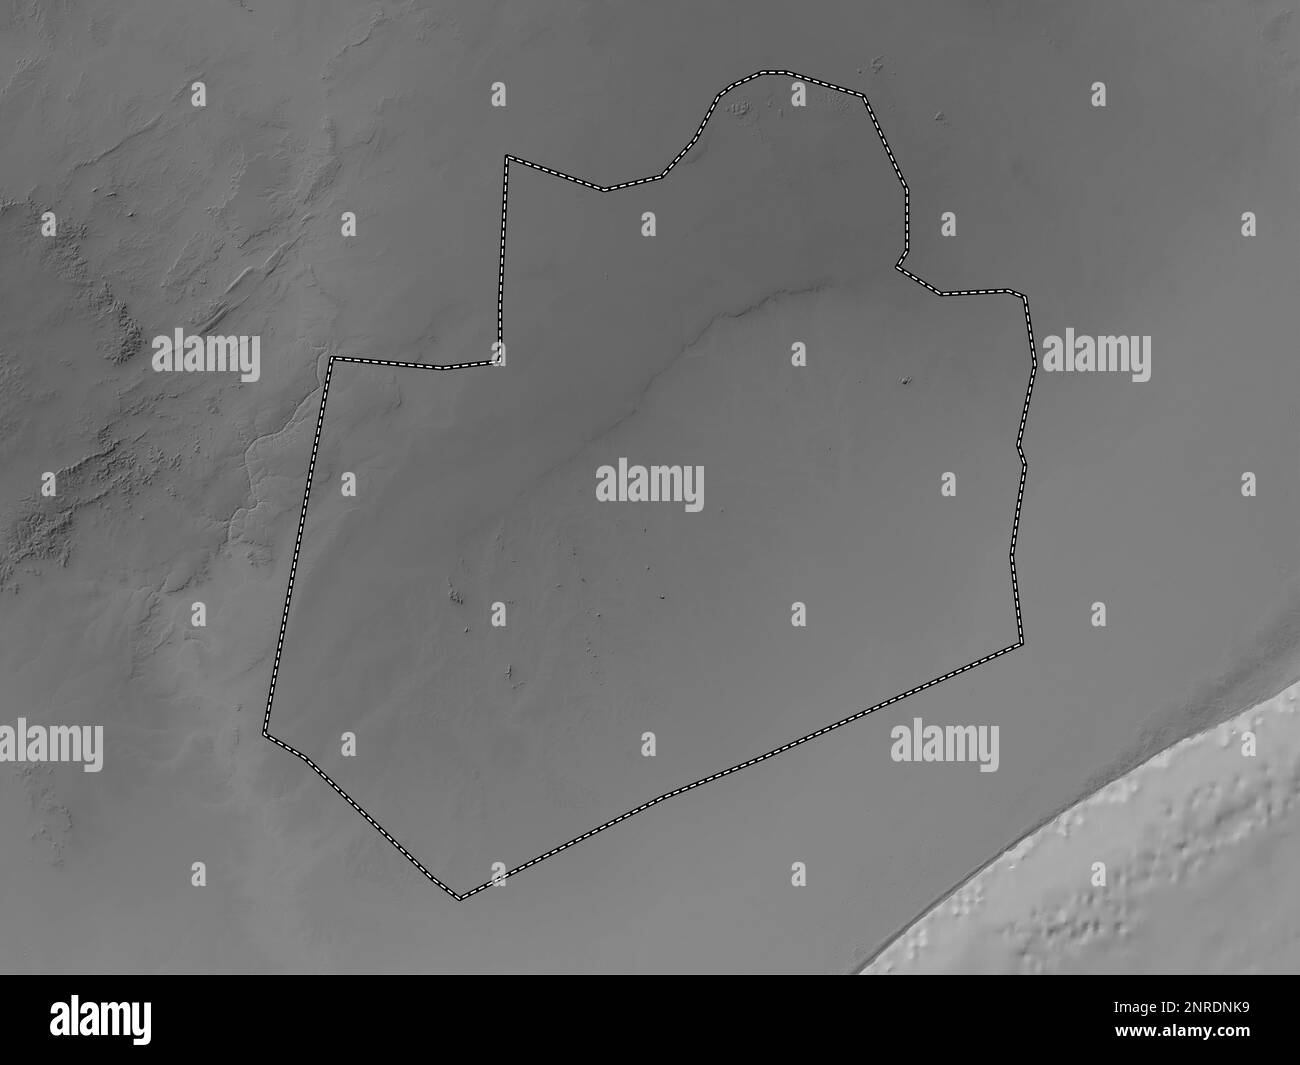 Bay, region of Somalia. Grayscale elevation map with lakes and rivers Stock Photo